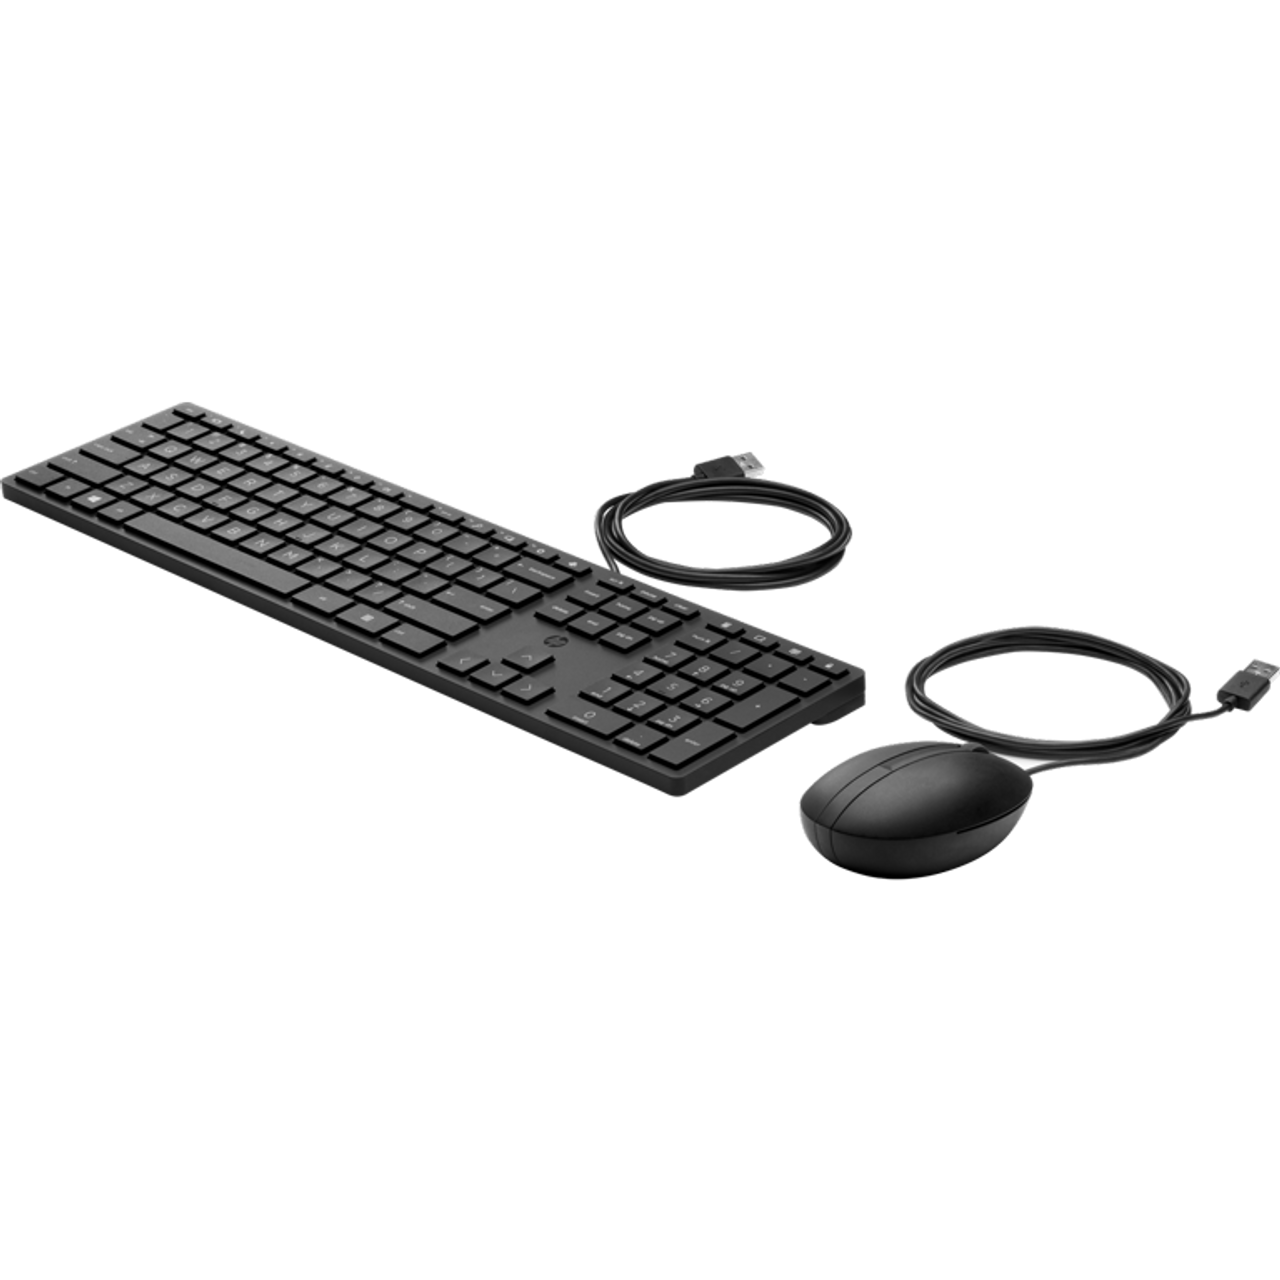 HP 320MK WIRED USB MOUSE AND KEYBOARD COMBO (9SR36UT#ABA) - NEW